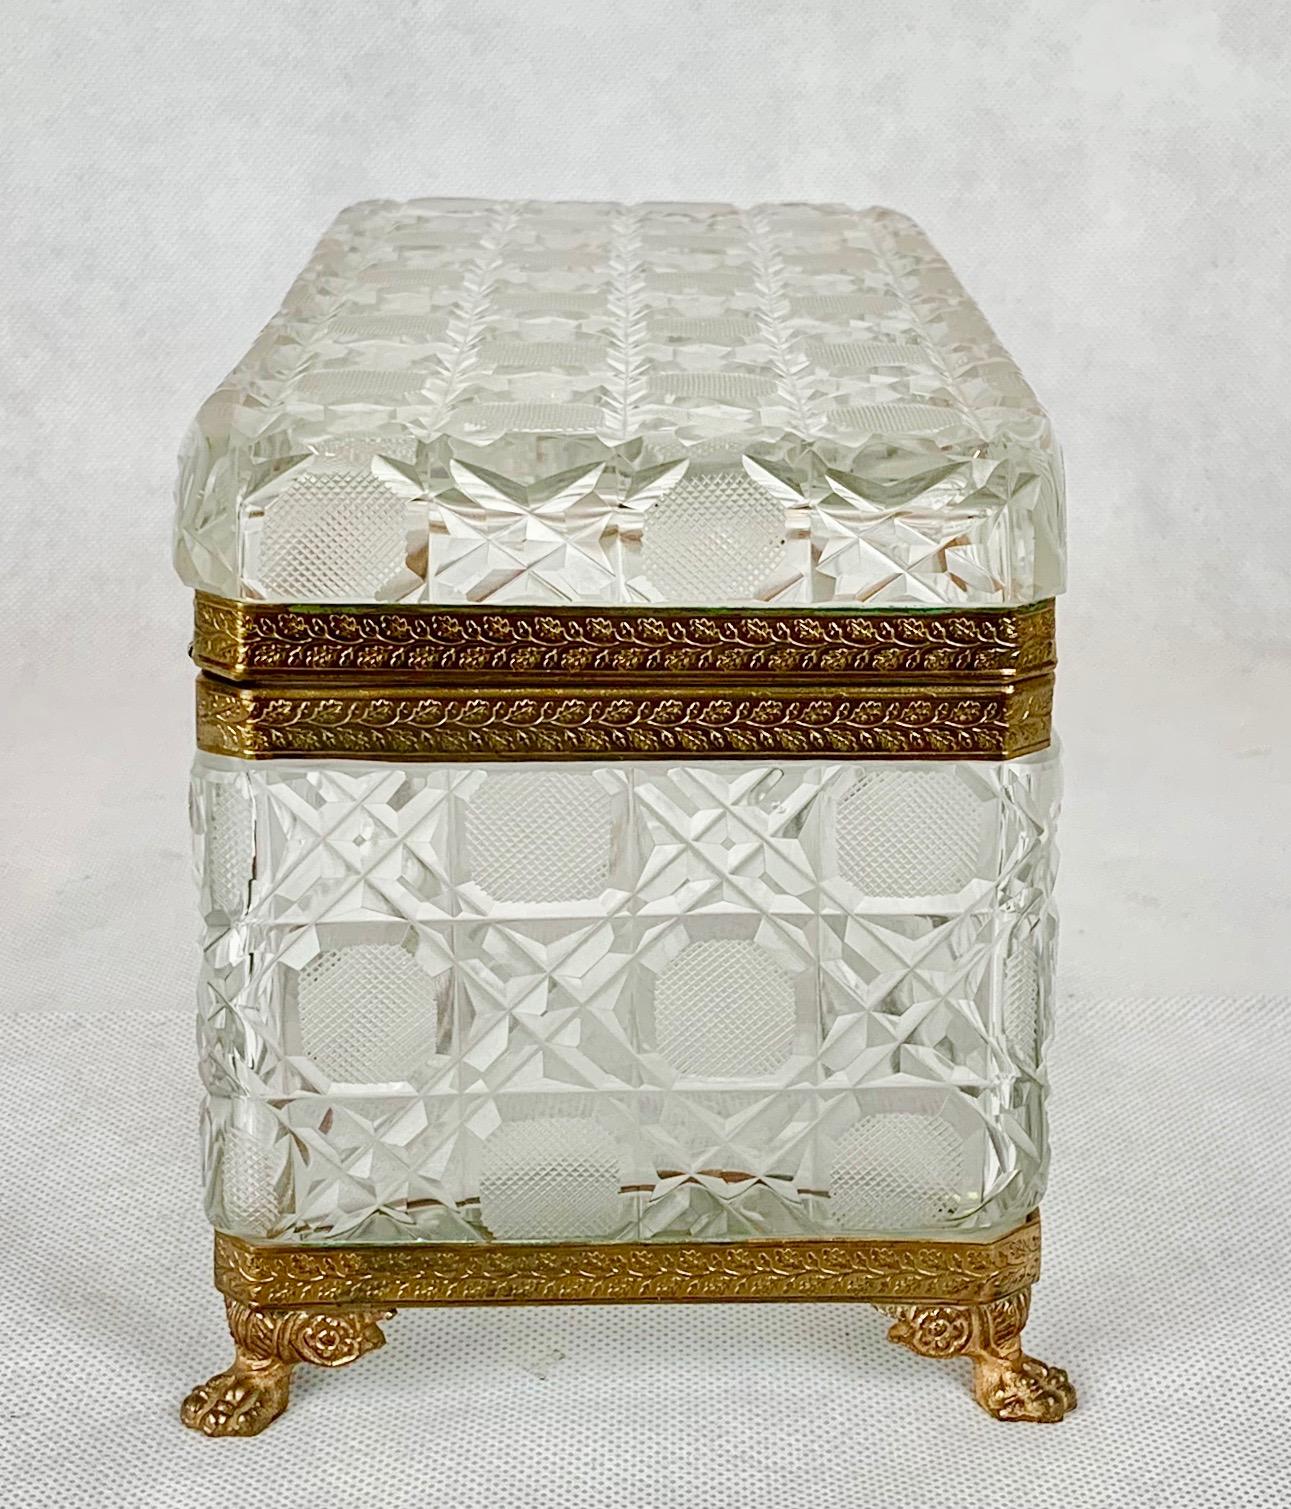 Belle Époque  Large Cut Crystal Box with a Gilt Frame in the Cane or Hobnail Pattern